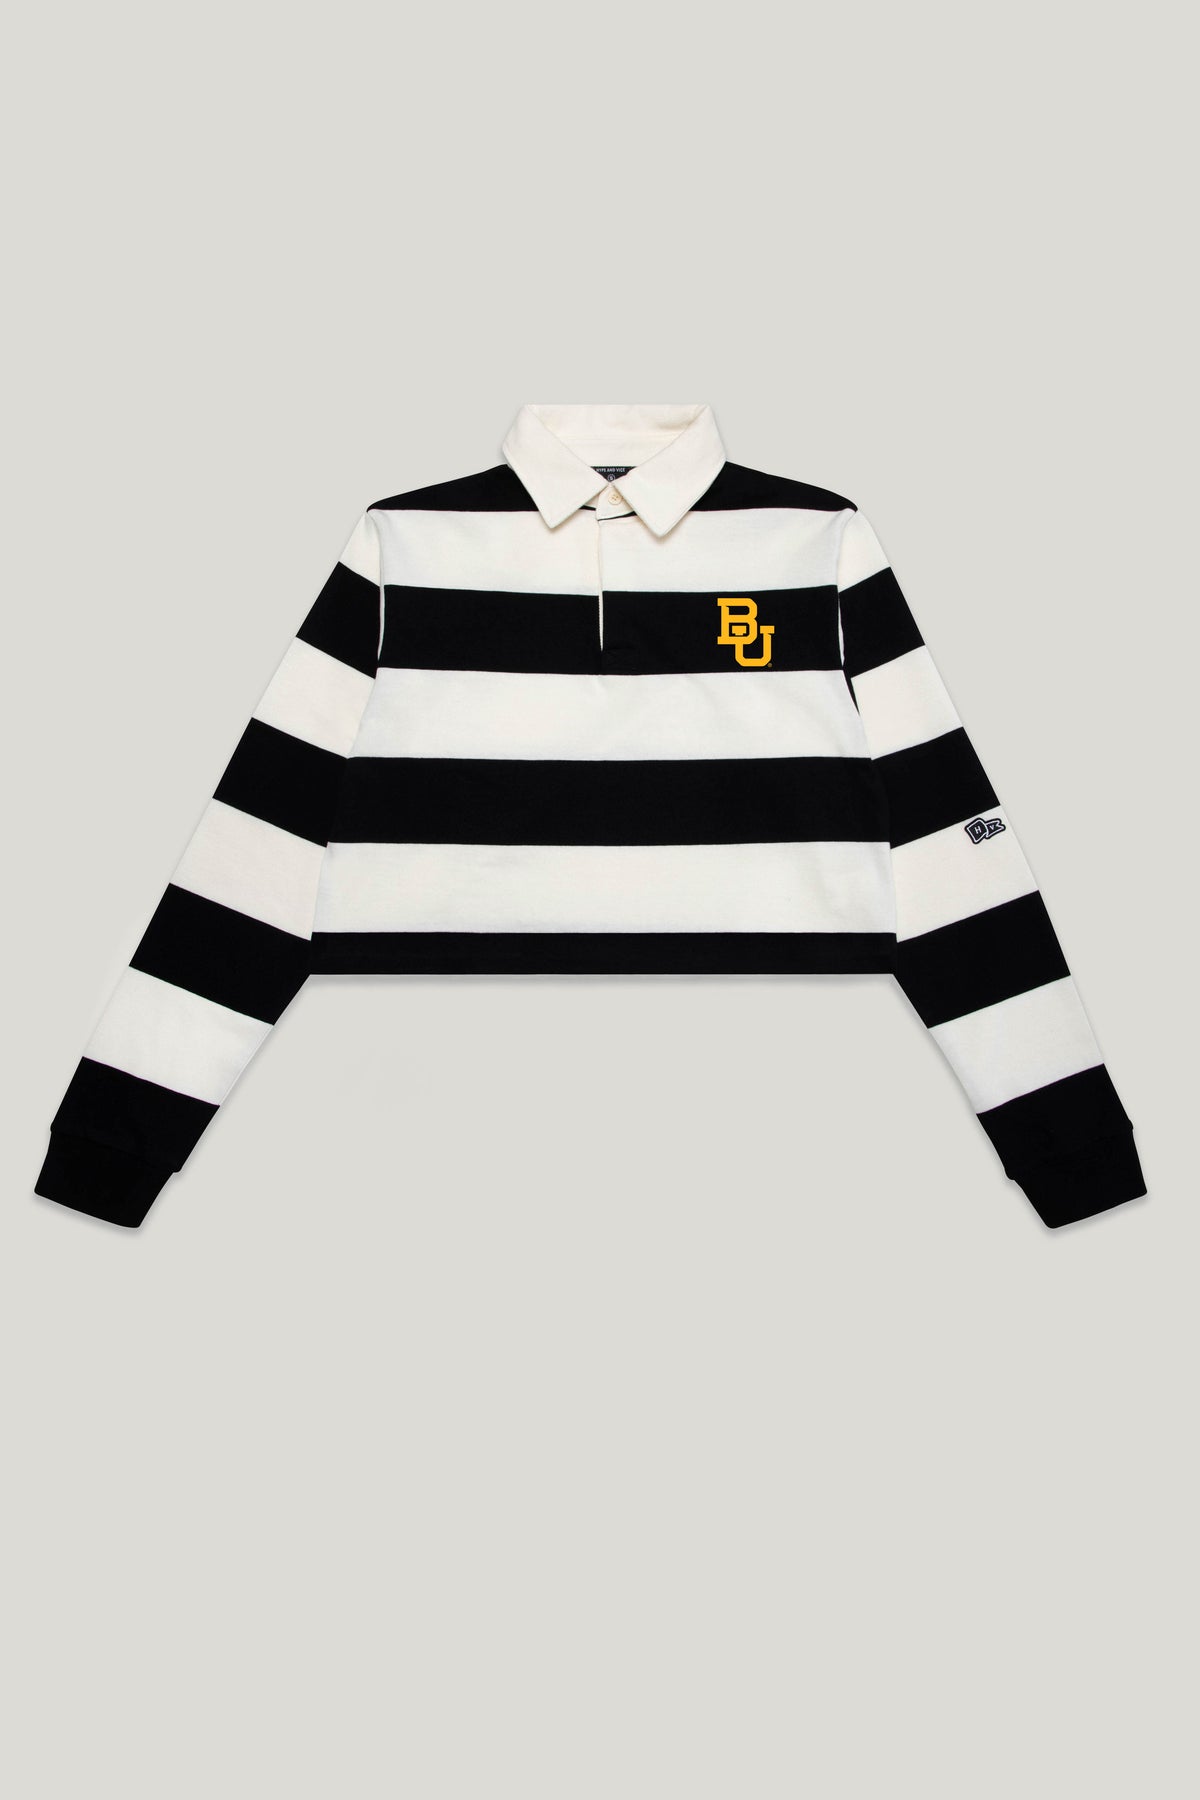 Baylor Rugby Top